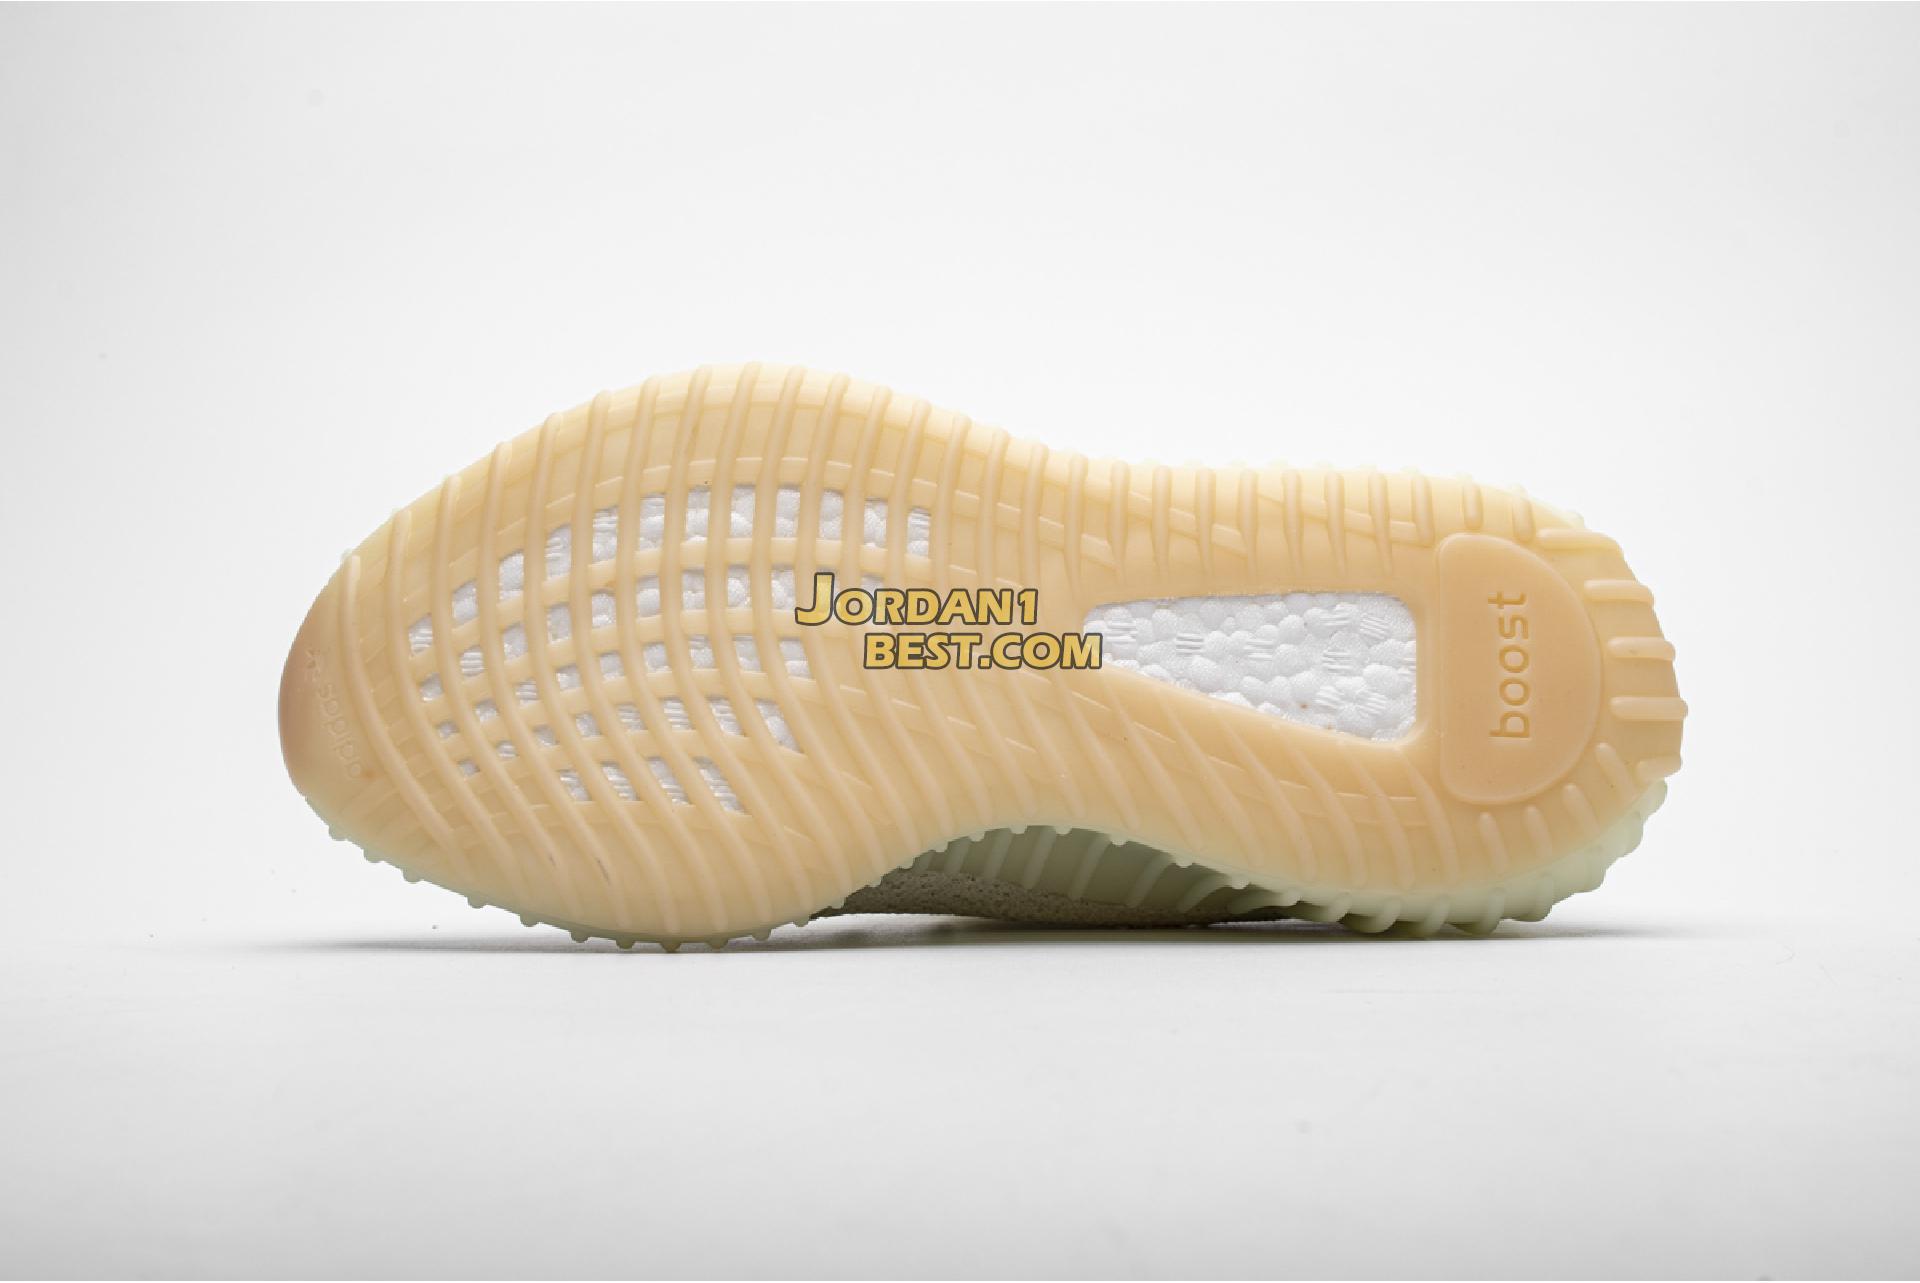 Adidas Yeezy Boost 350 V2 "Butter" F36980